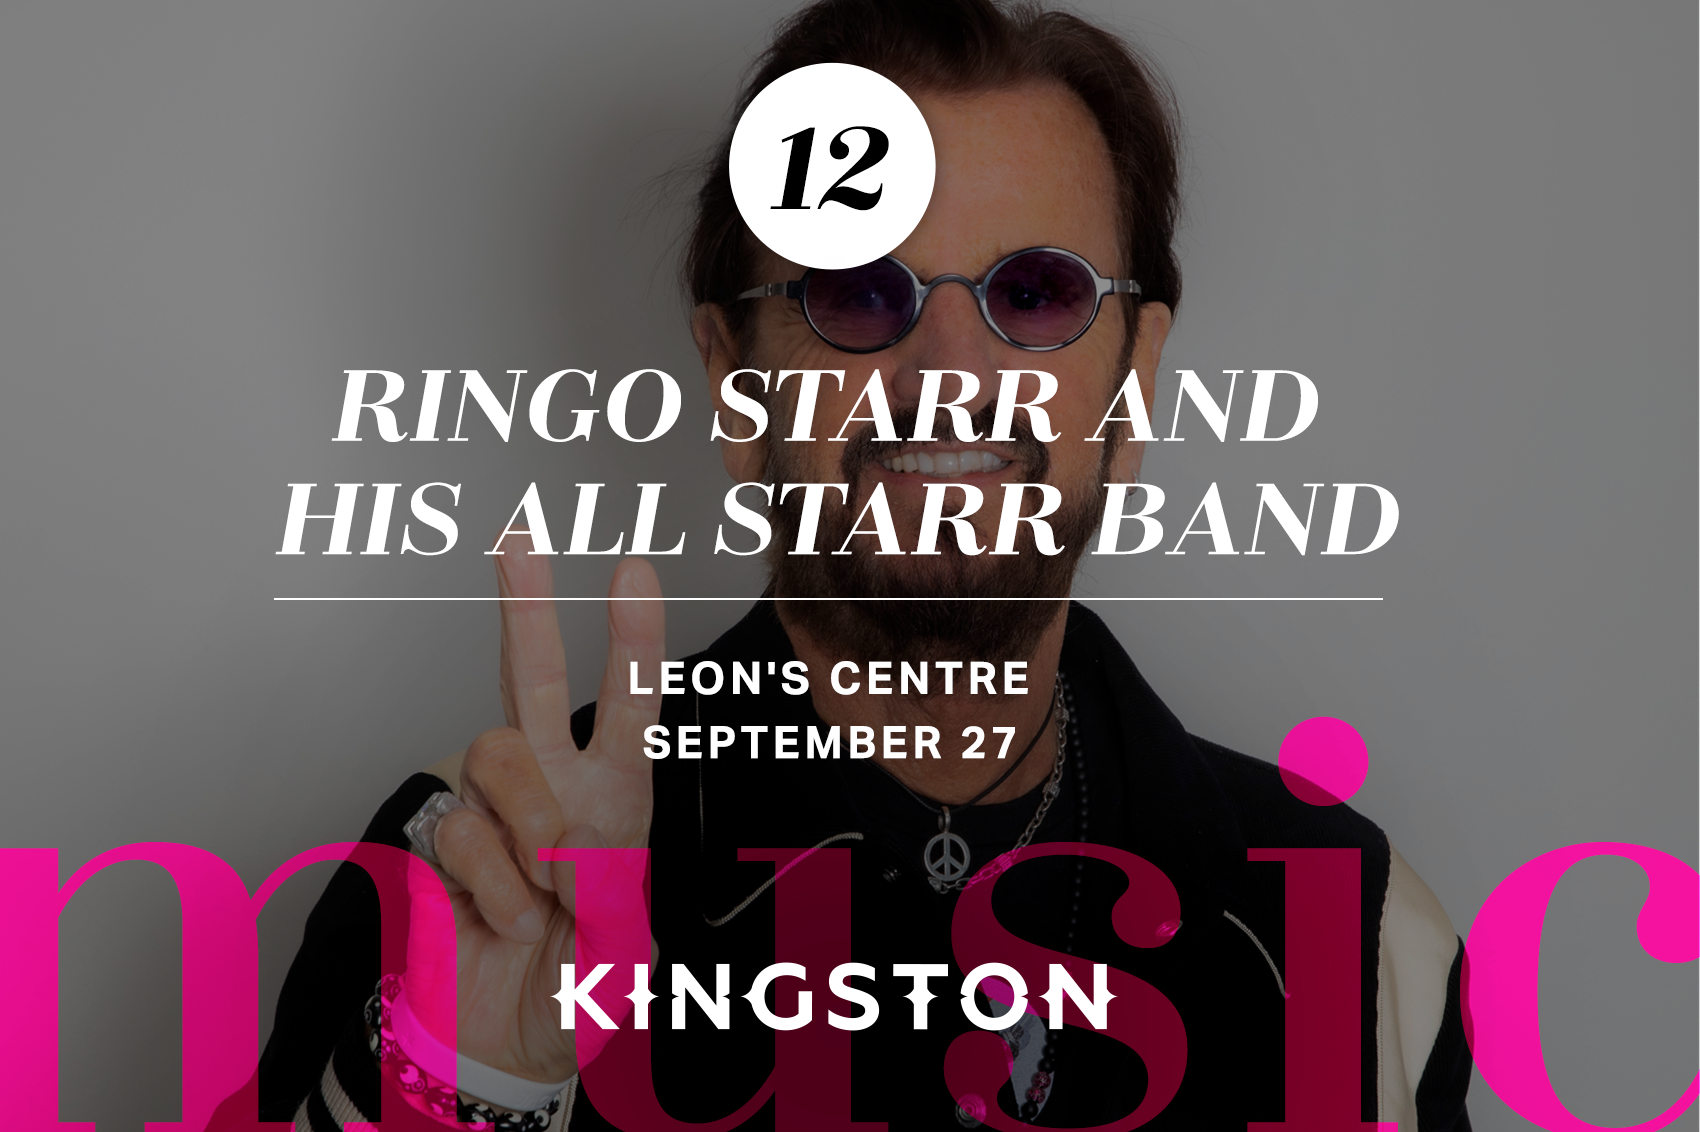 12. Ringo Starr and His All Starr Band: Leon's Centre September 27